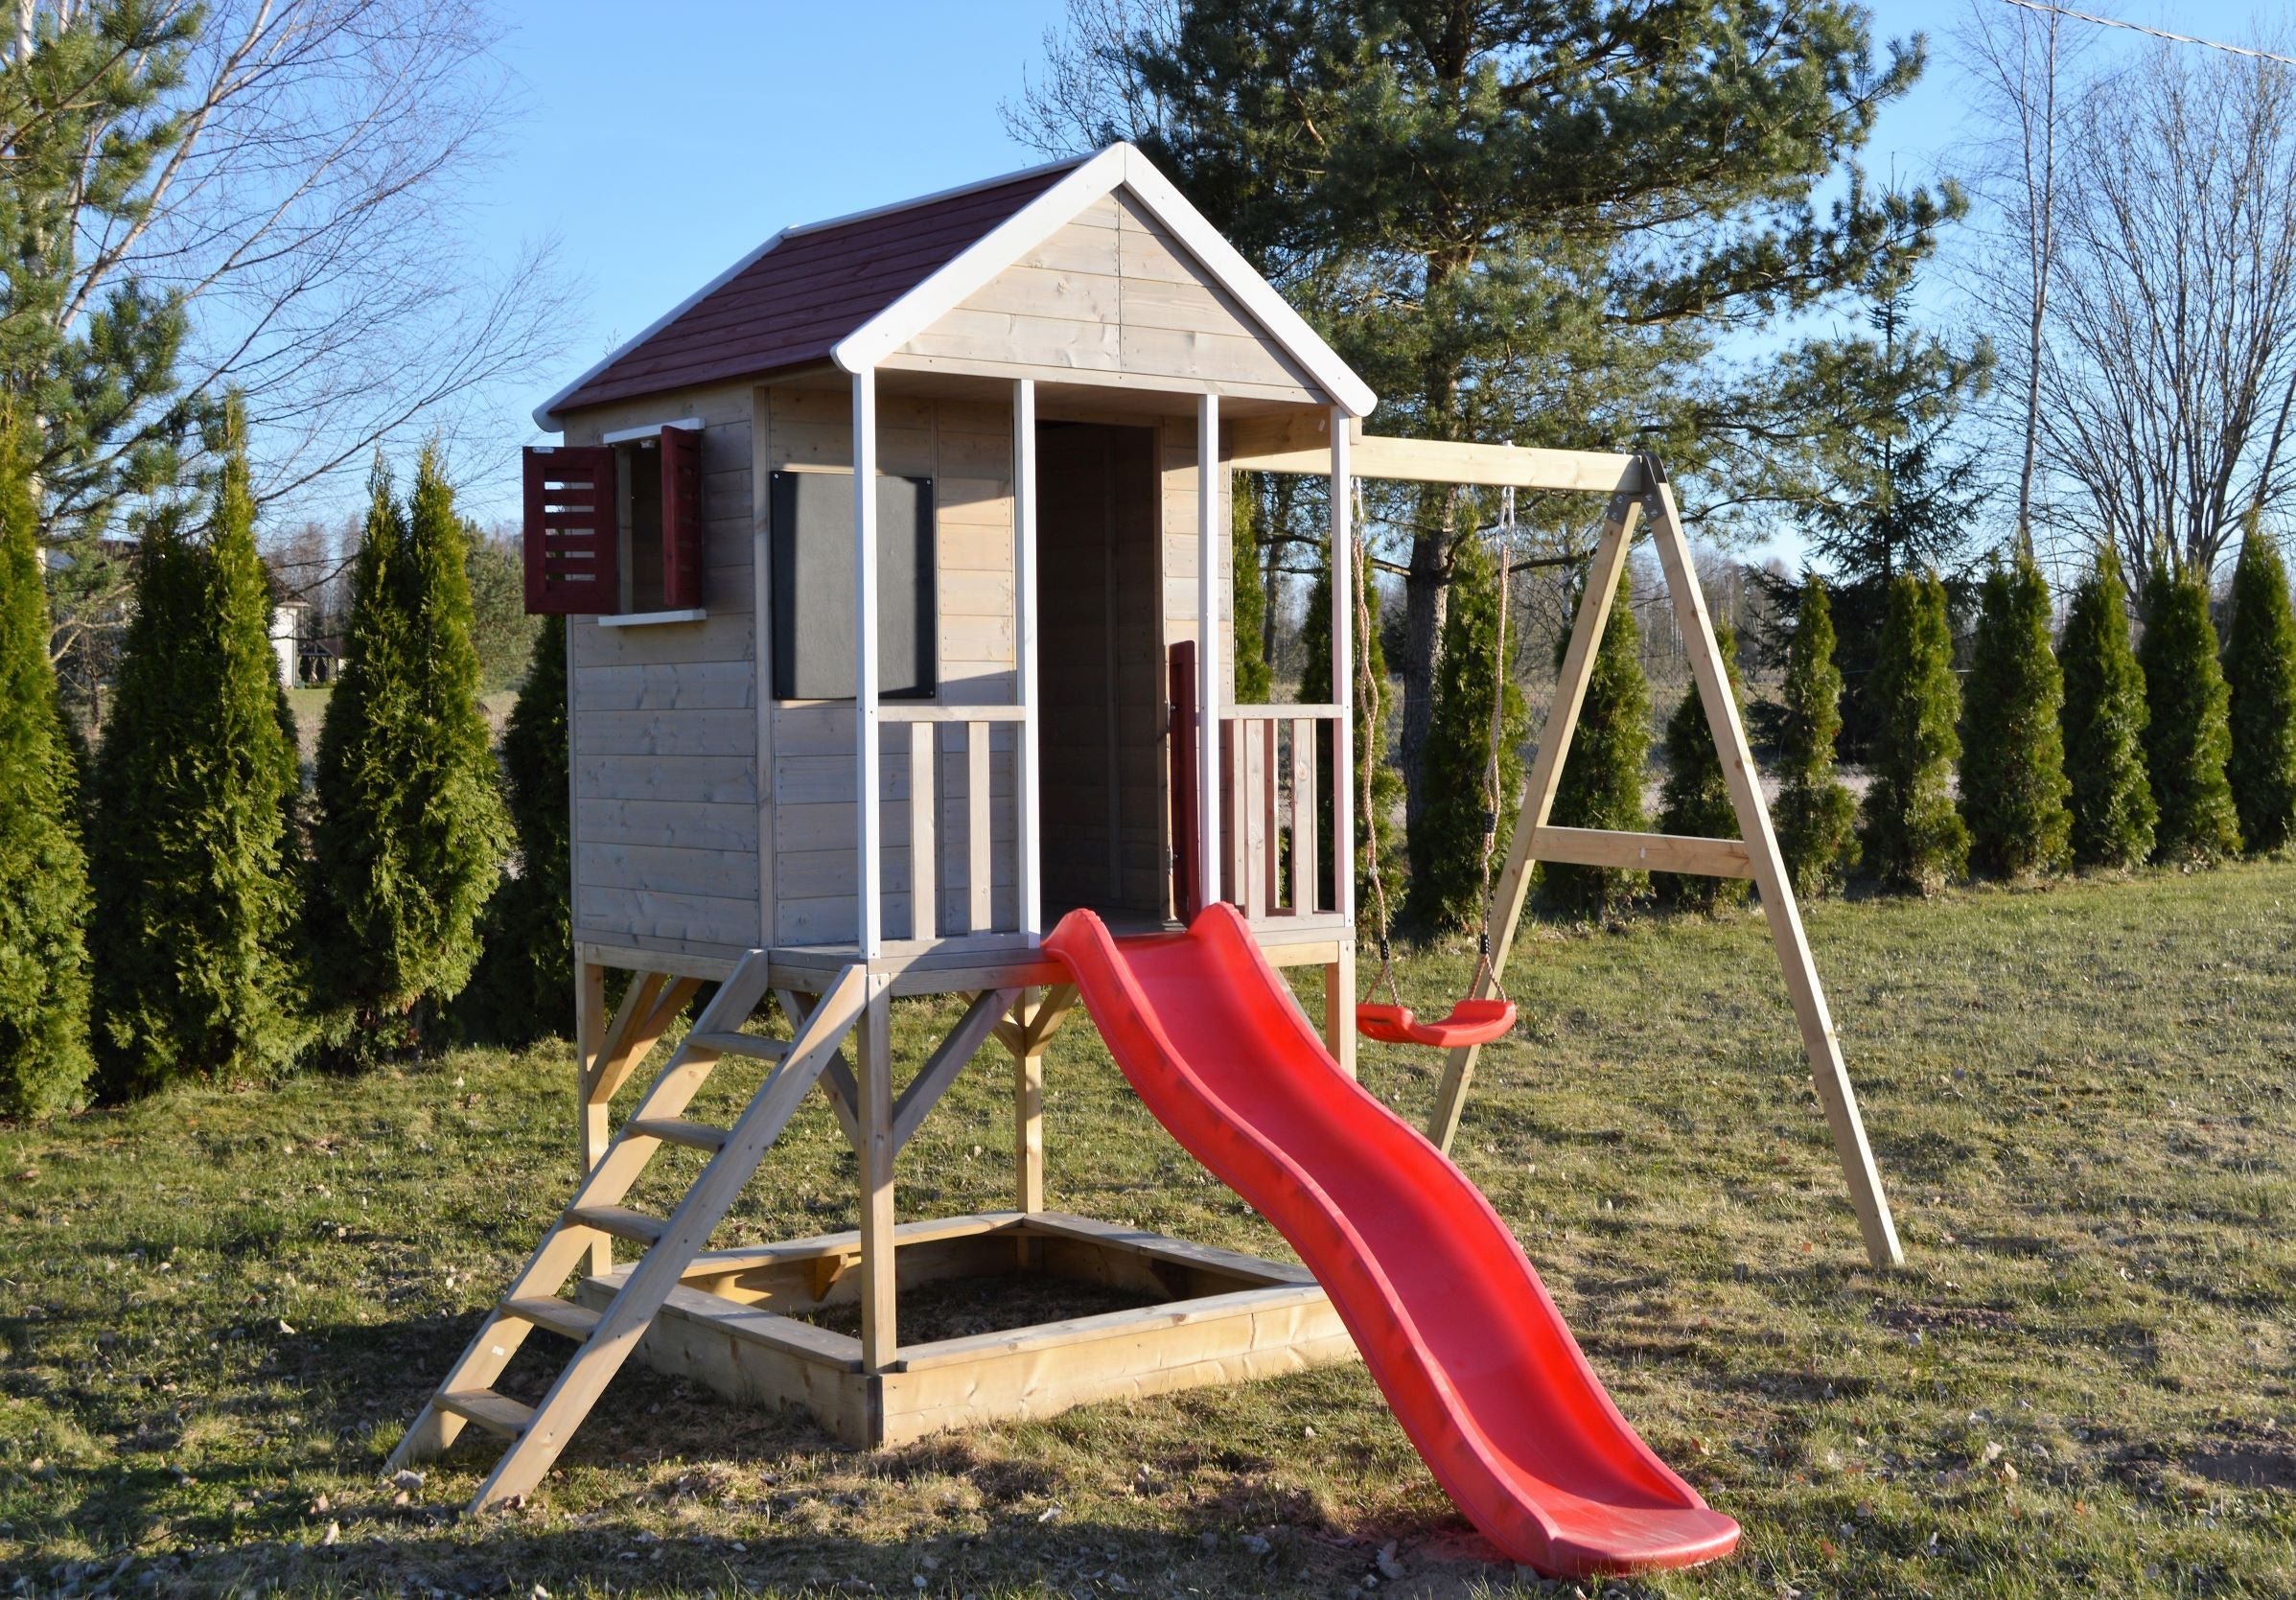 M9R-G Summer Adventure House with Platform, Slide and Single Swing + Gym Attachment